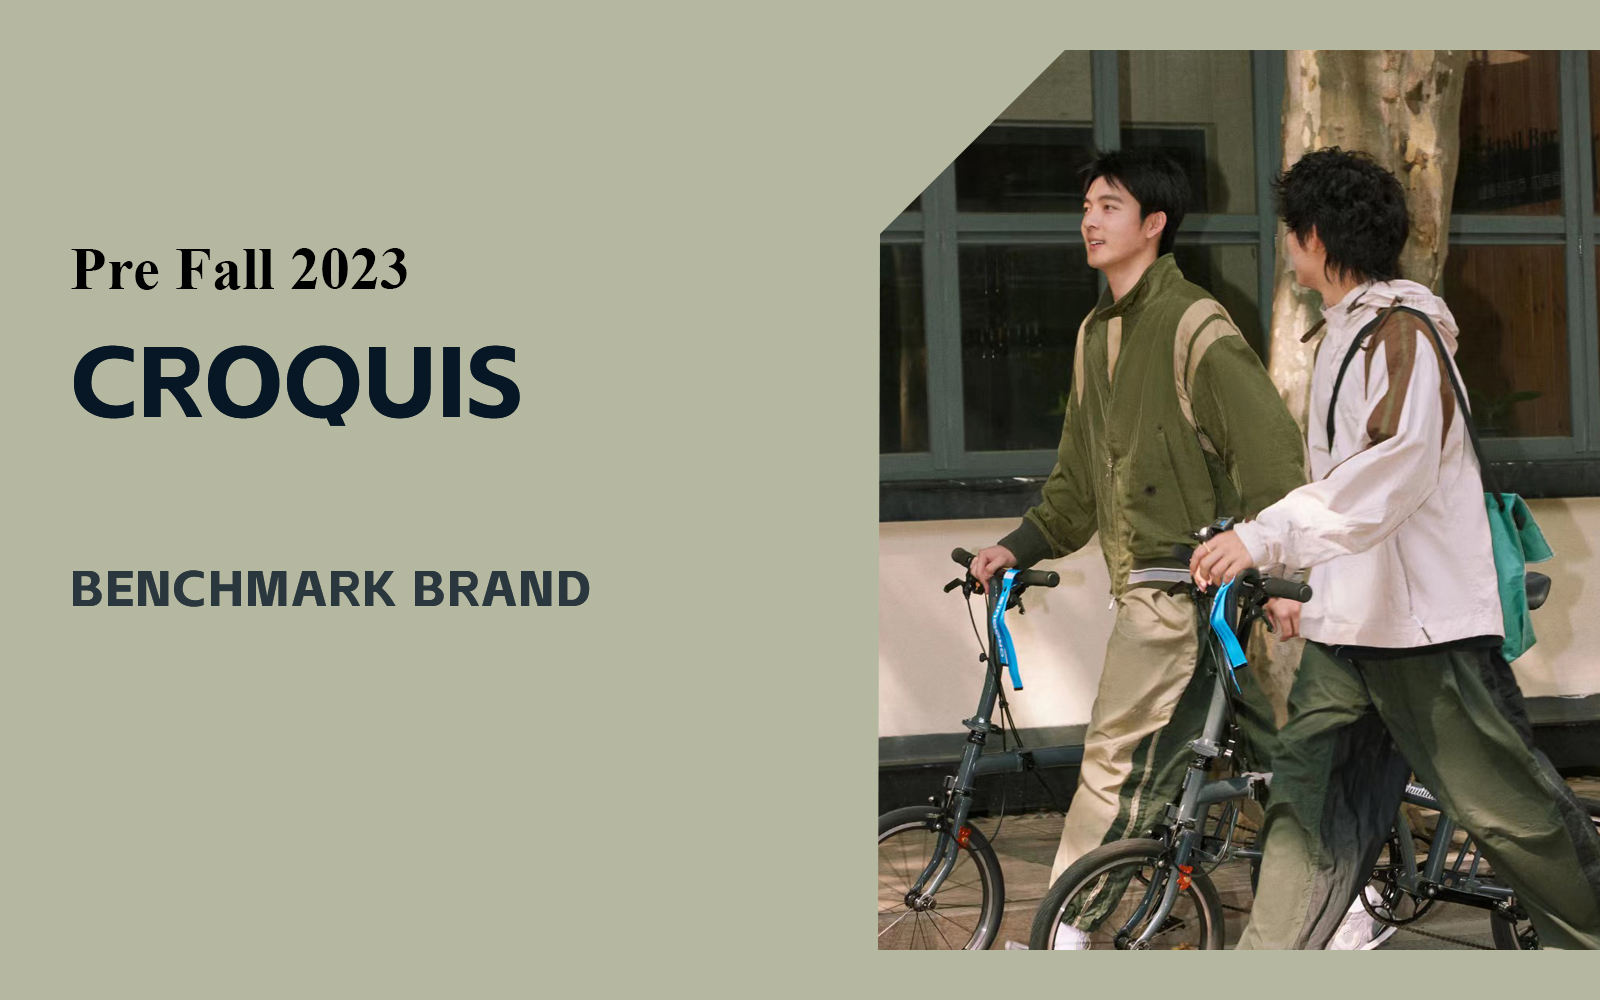 The Analysis of CROQUIS The Benchmark Menswear Brand